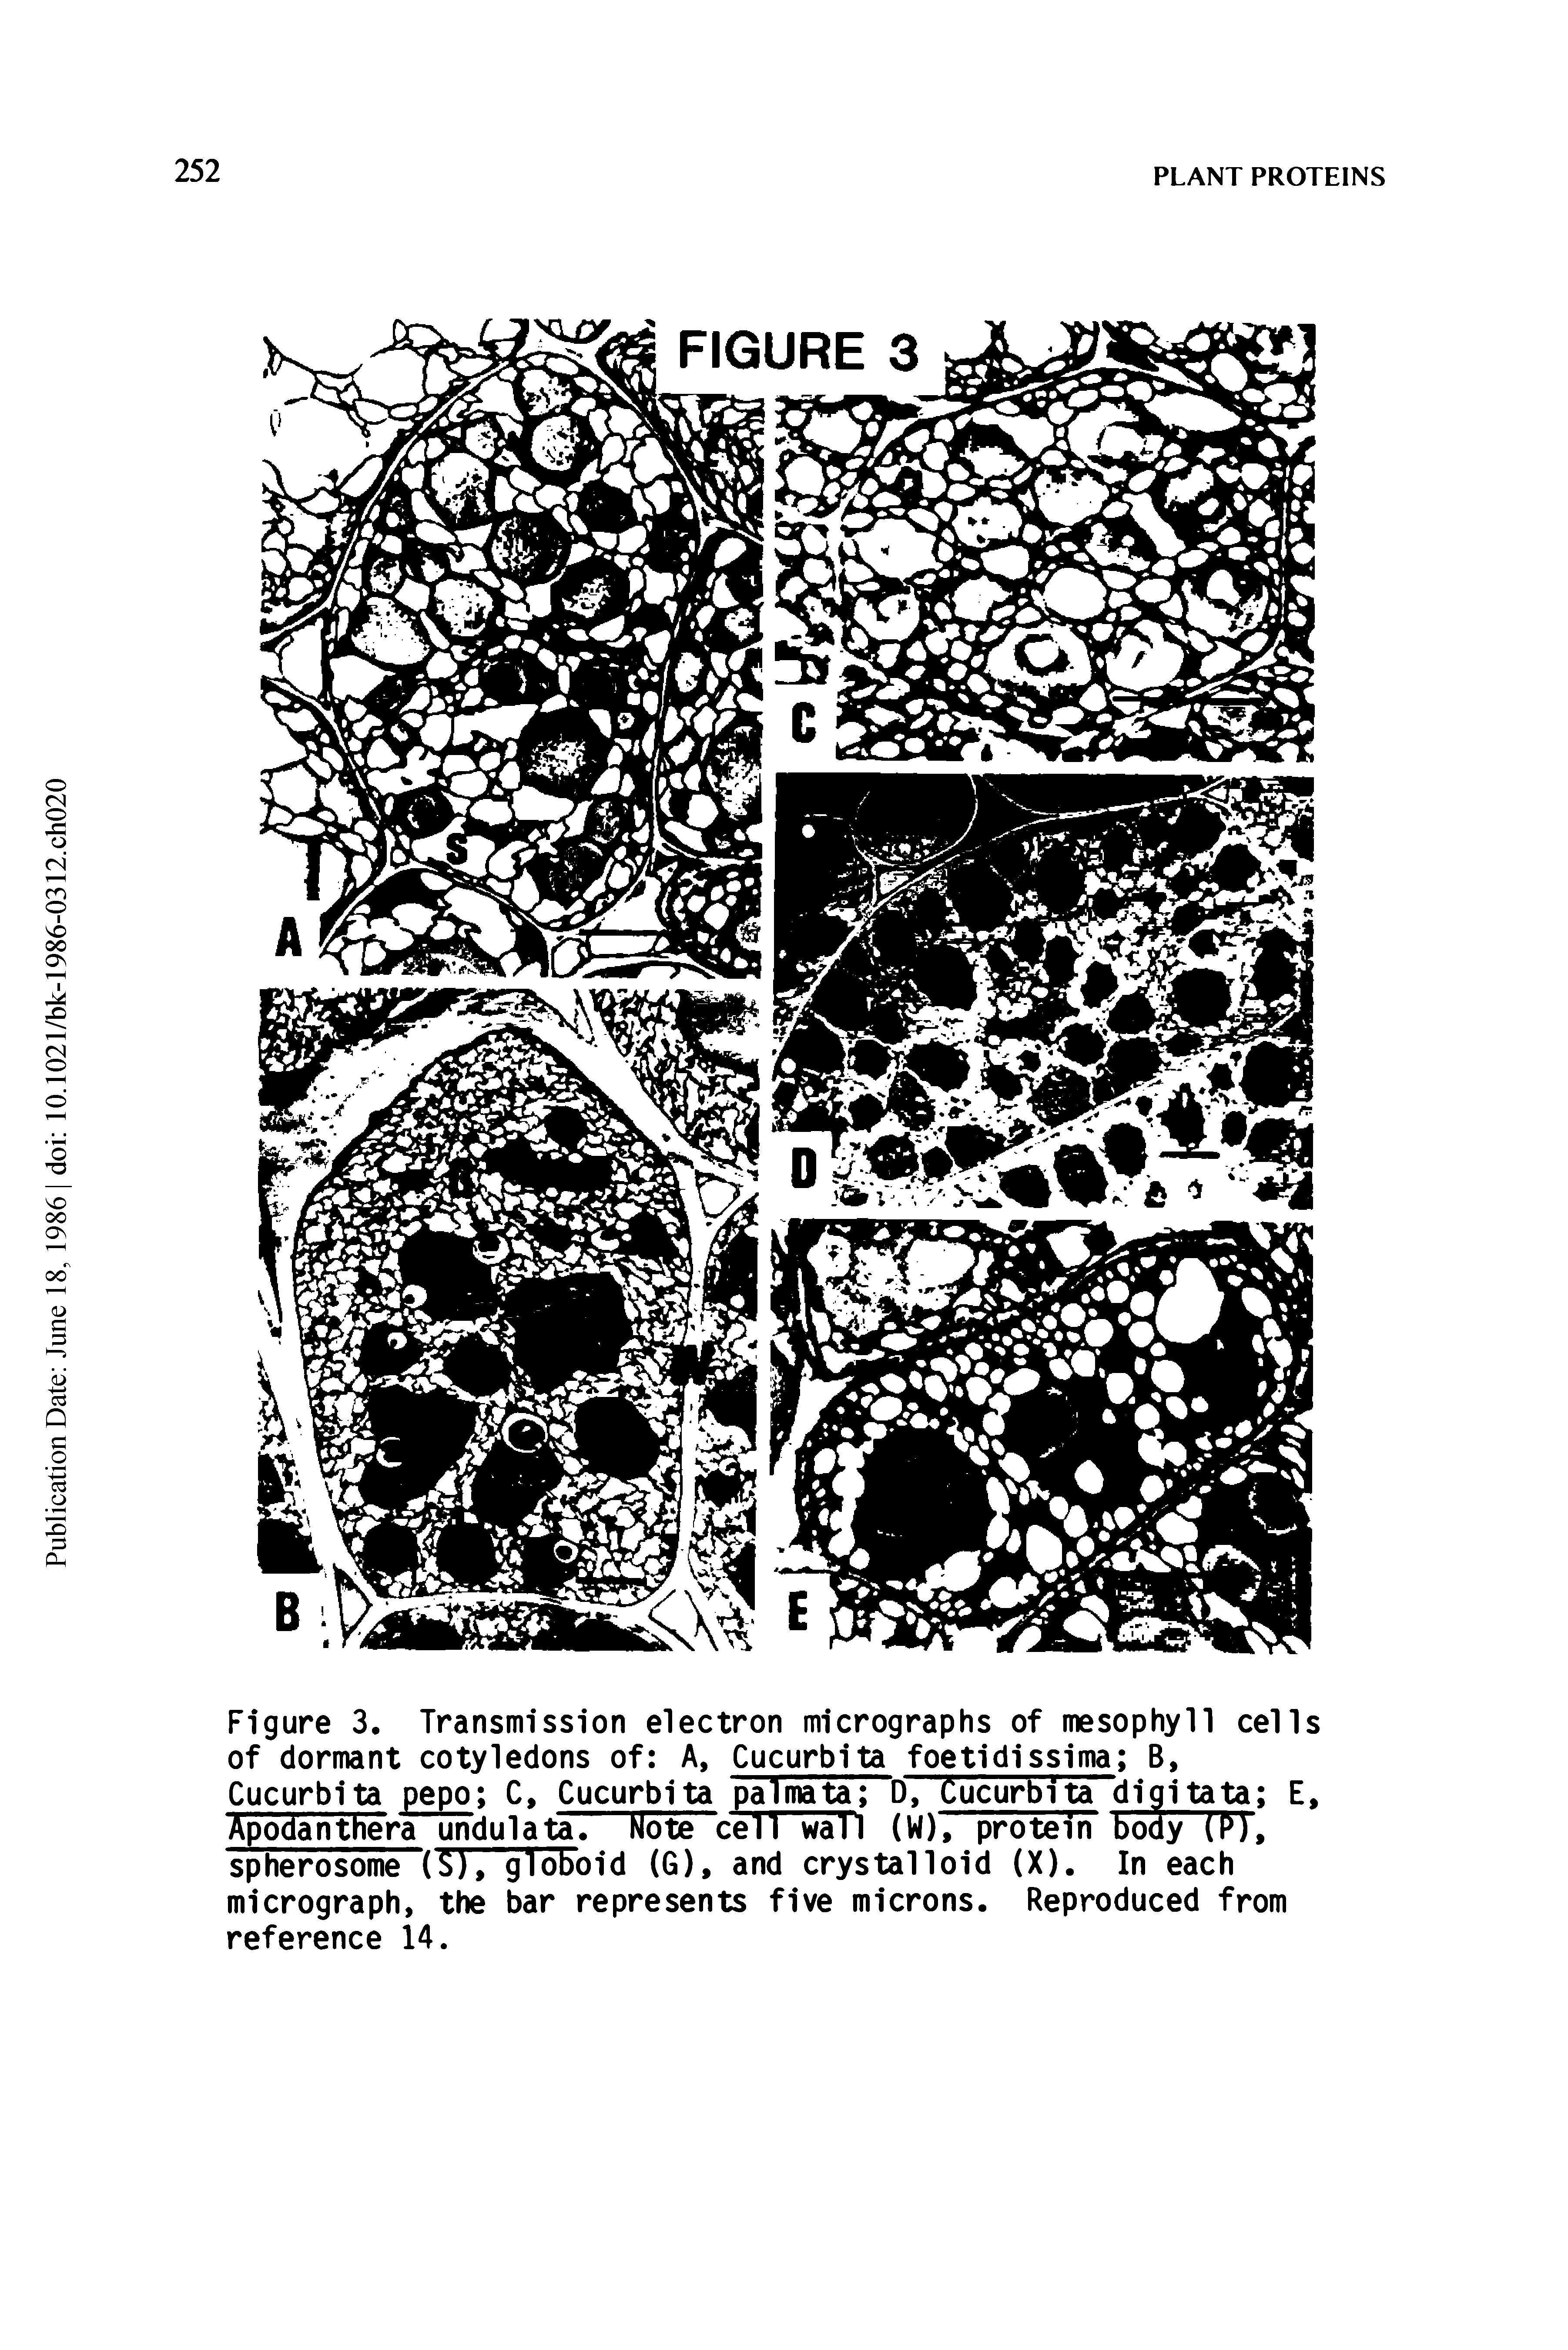 Figure 3. Transmission electron micrographs of mesophyll cells of dormant cotyledons of A, Cucurbita foetidissima B, Cucurbita pepo C, Cucurbita palmata D, Cucurbita digitata E, Apodanthera undulata" Note cell wall (W), protein body (P), spherosome (S), globoid (G), and crystalloid (X). In each micrograph, the bar represents five microns. Reproduced from reference 14.